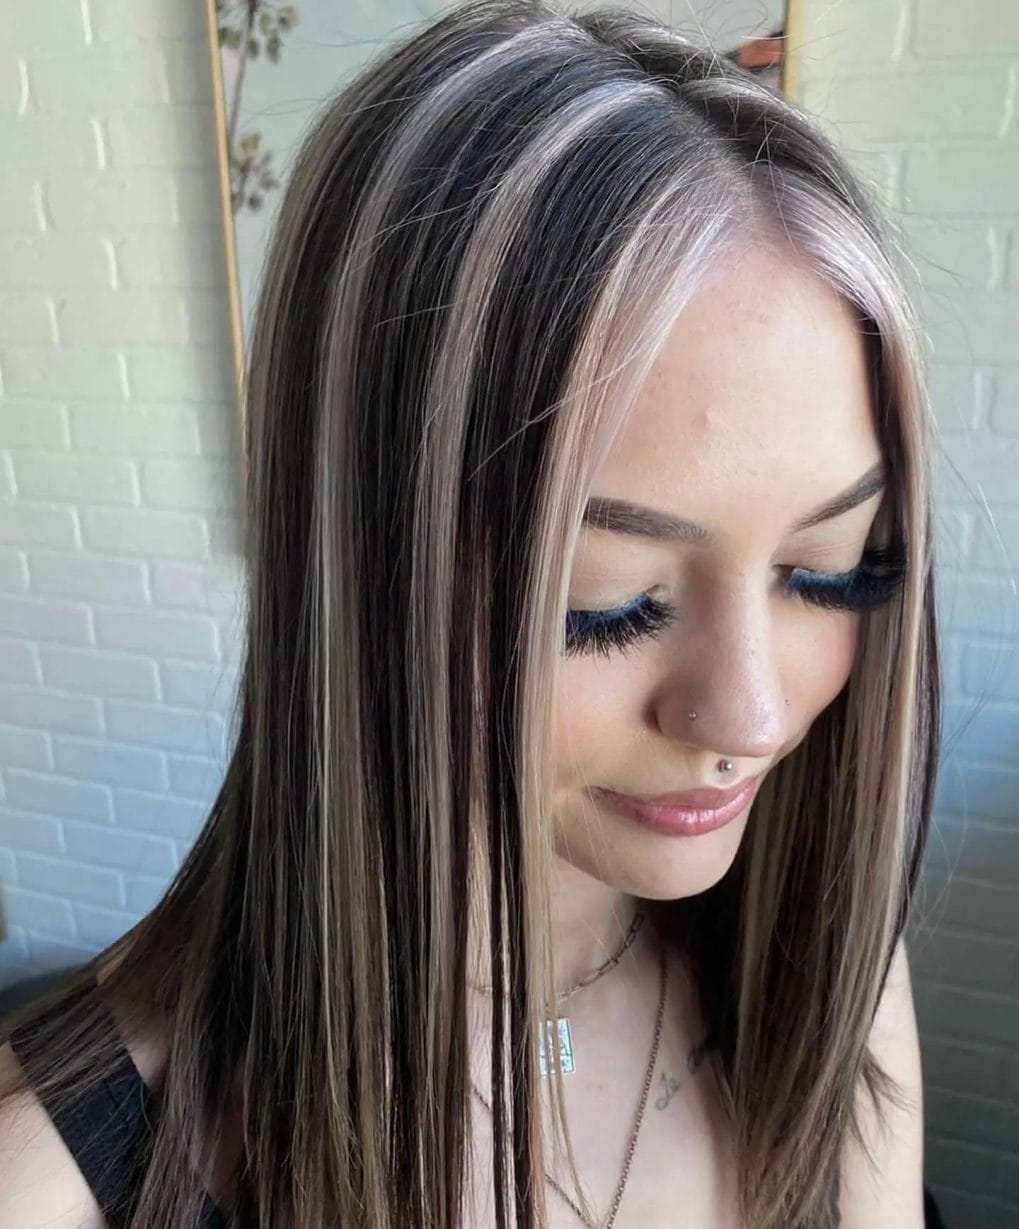 Icy blonde highlights in straight, chest-length brunette, off-center parting.